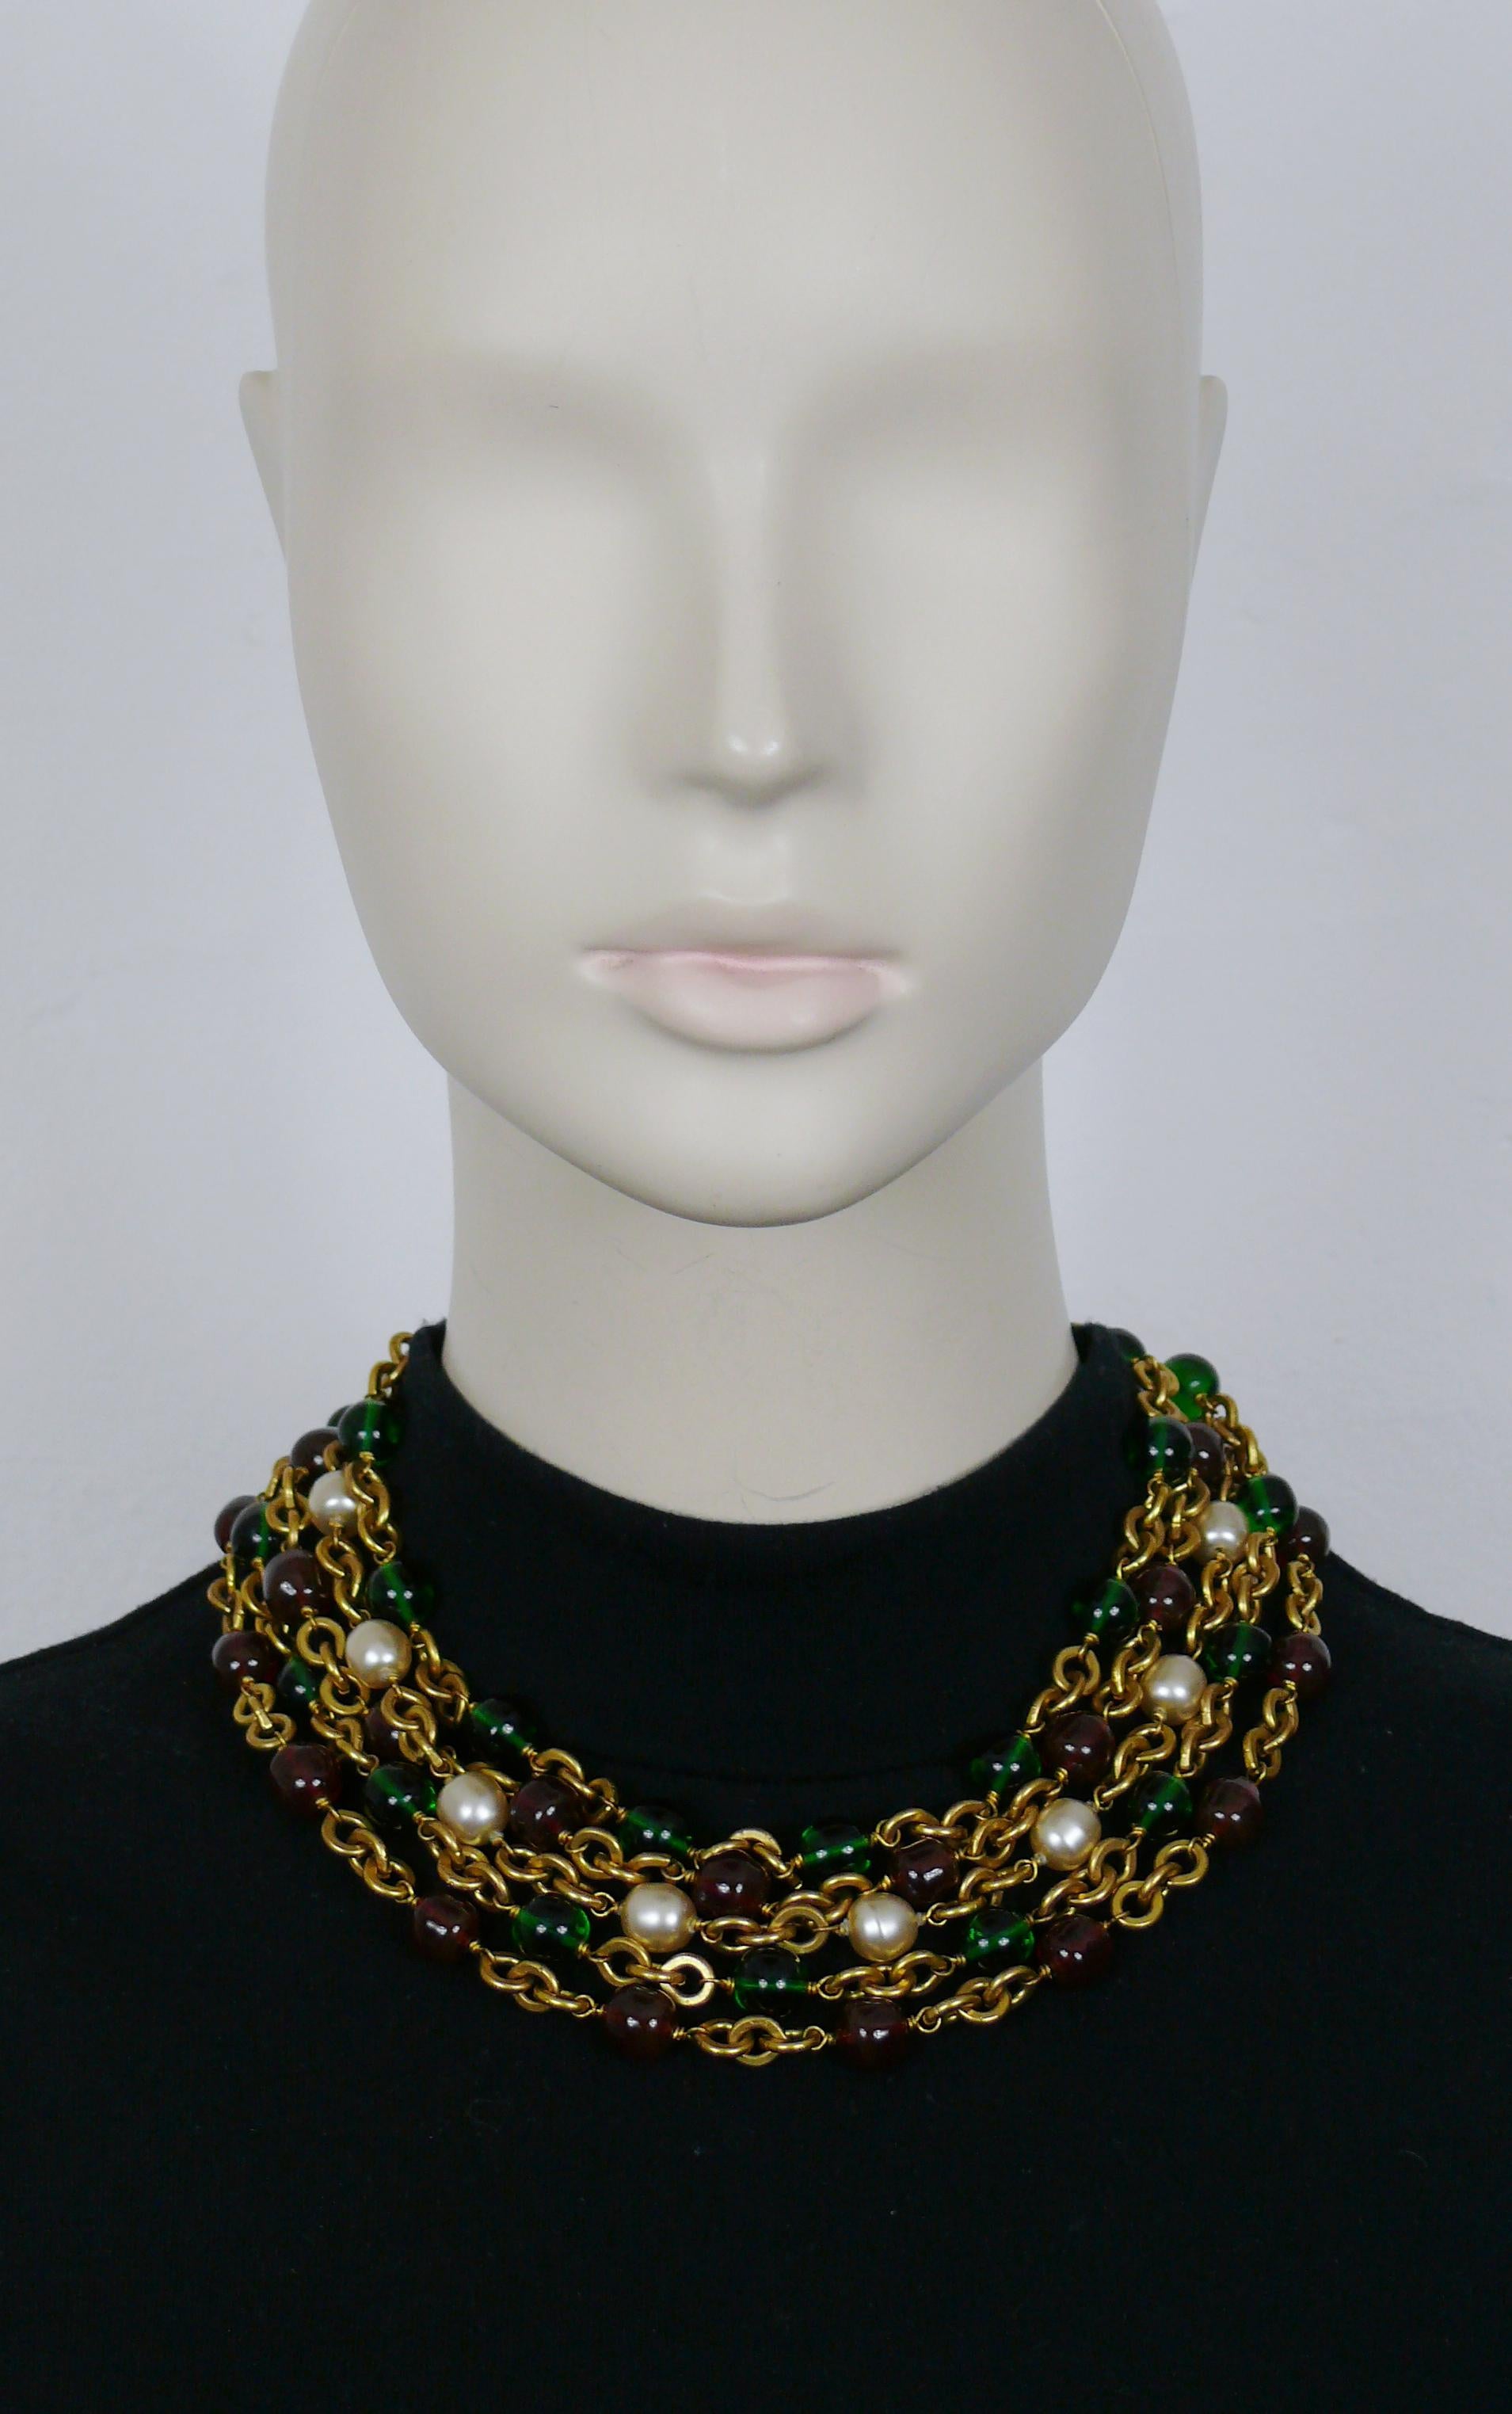 CHANEL by KARL LAGERFELD gold tone triple strand necklace featuring faux pearls and MAISON GRIPOIX green and red glass beads.

CHANEL jewelry creator director : VICTOIRE DE CASTELLANE.
Collection number 23 (year : 1988).

Hook clasp